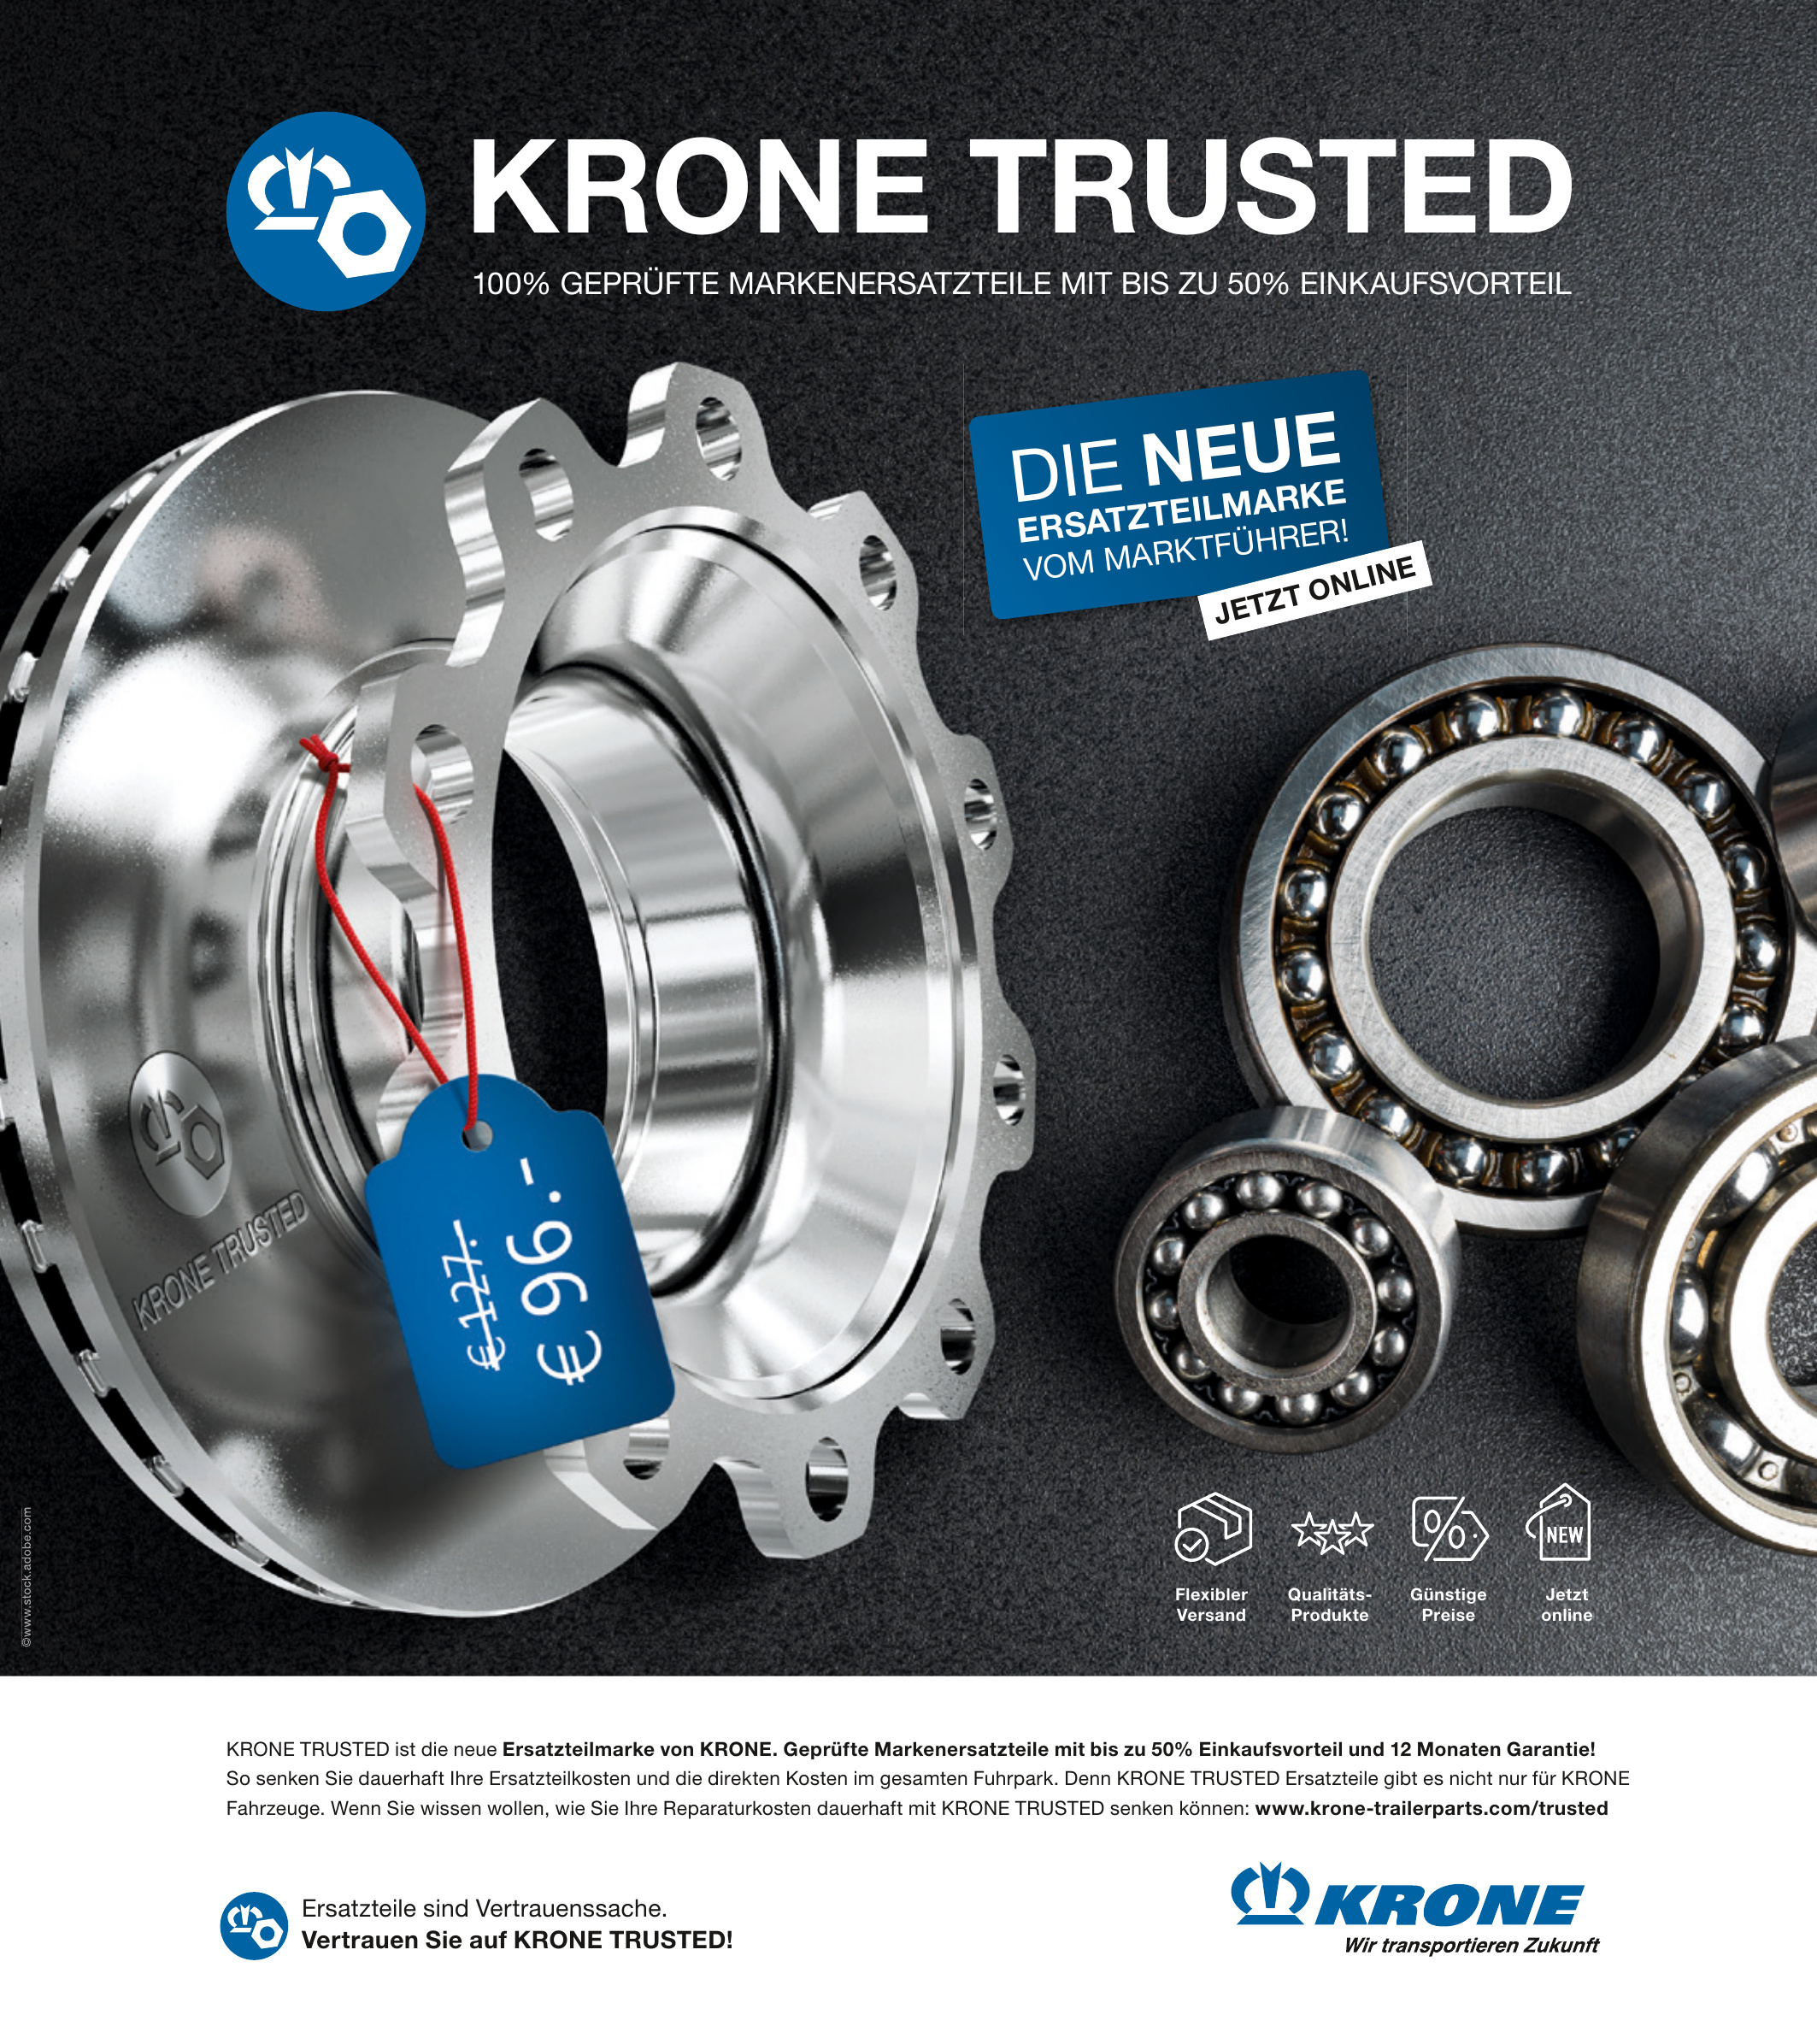 KRONE TRUSTED